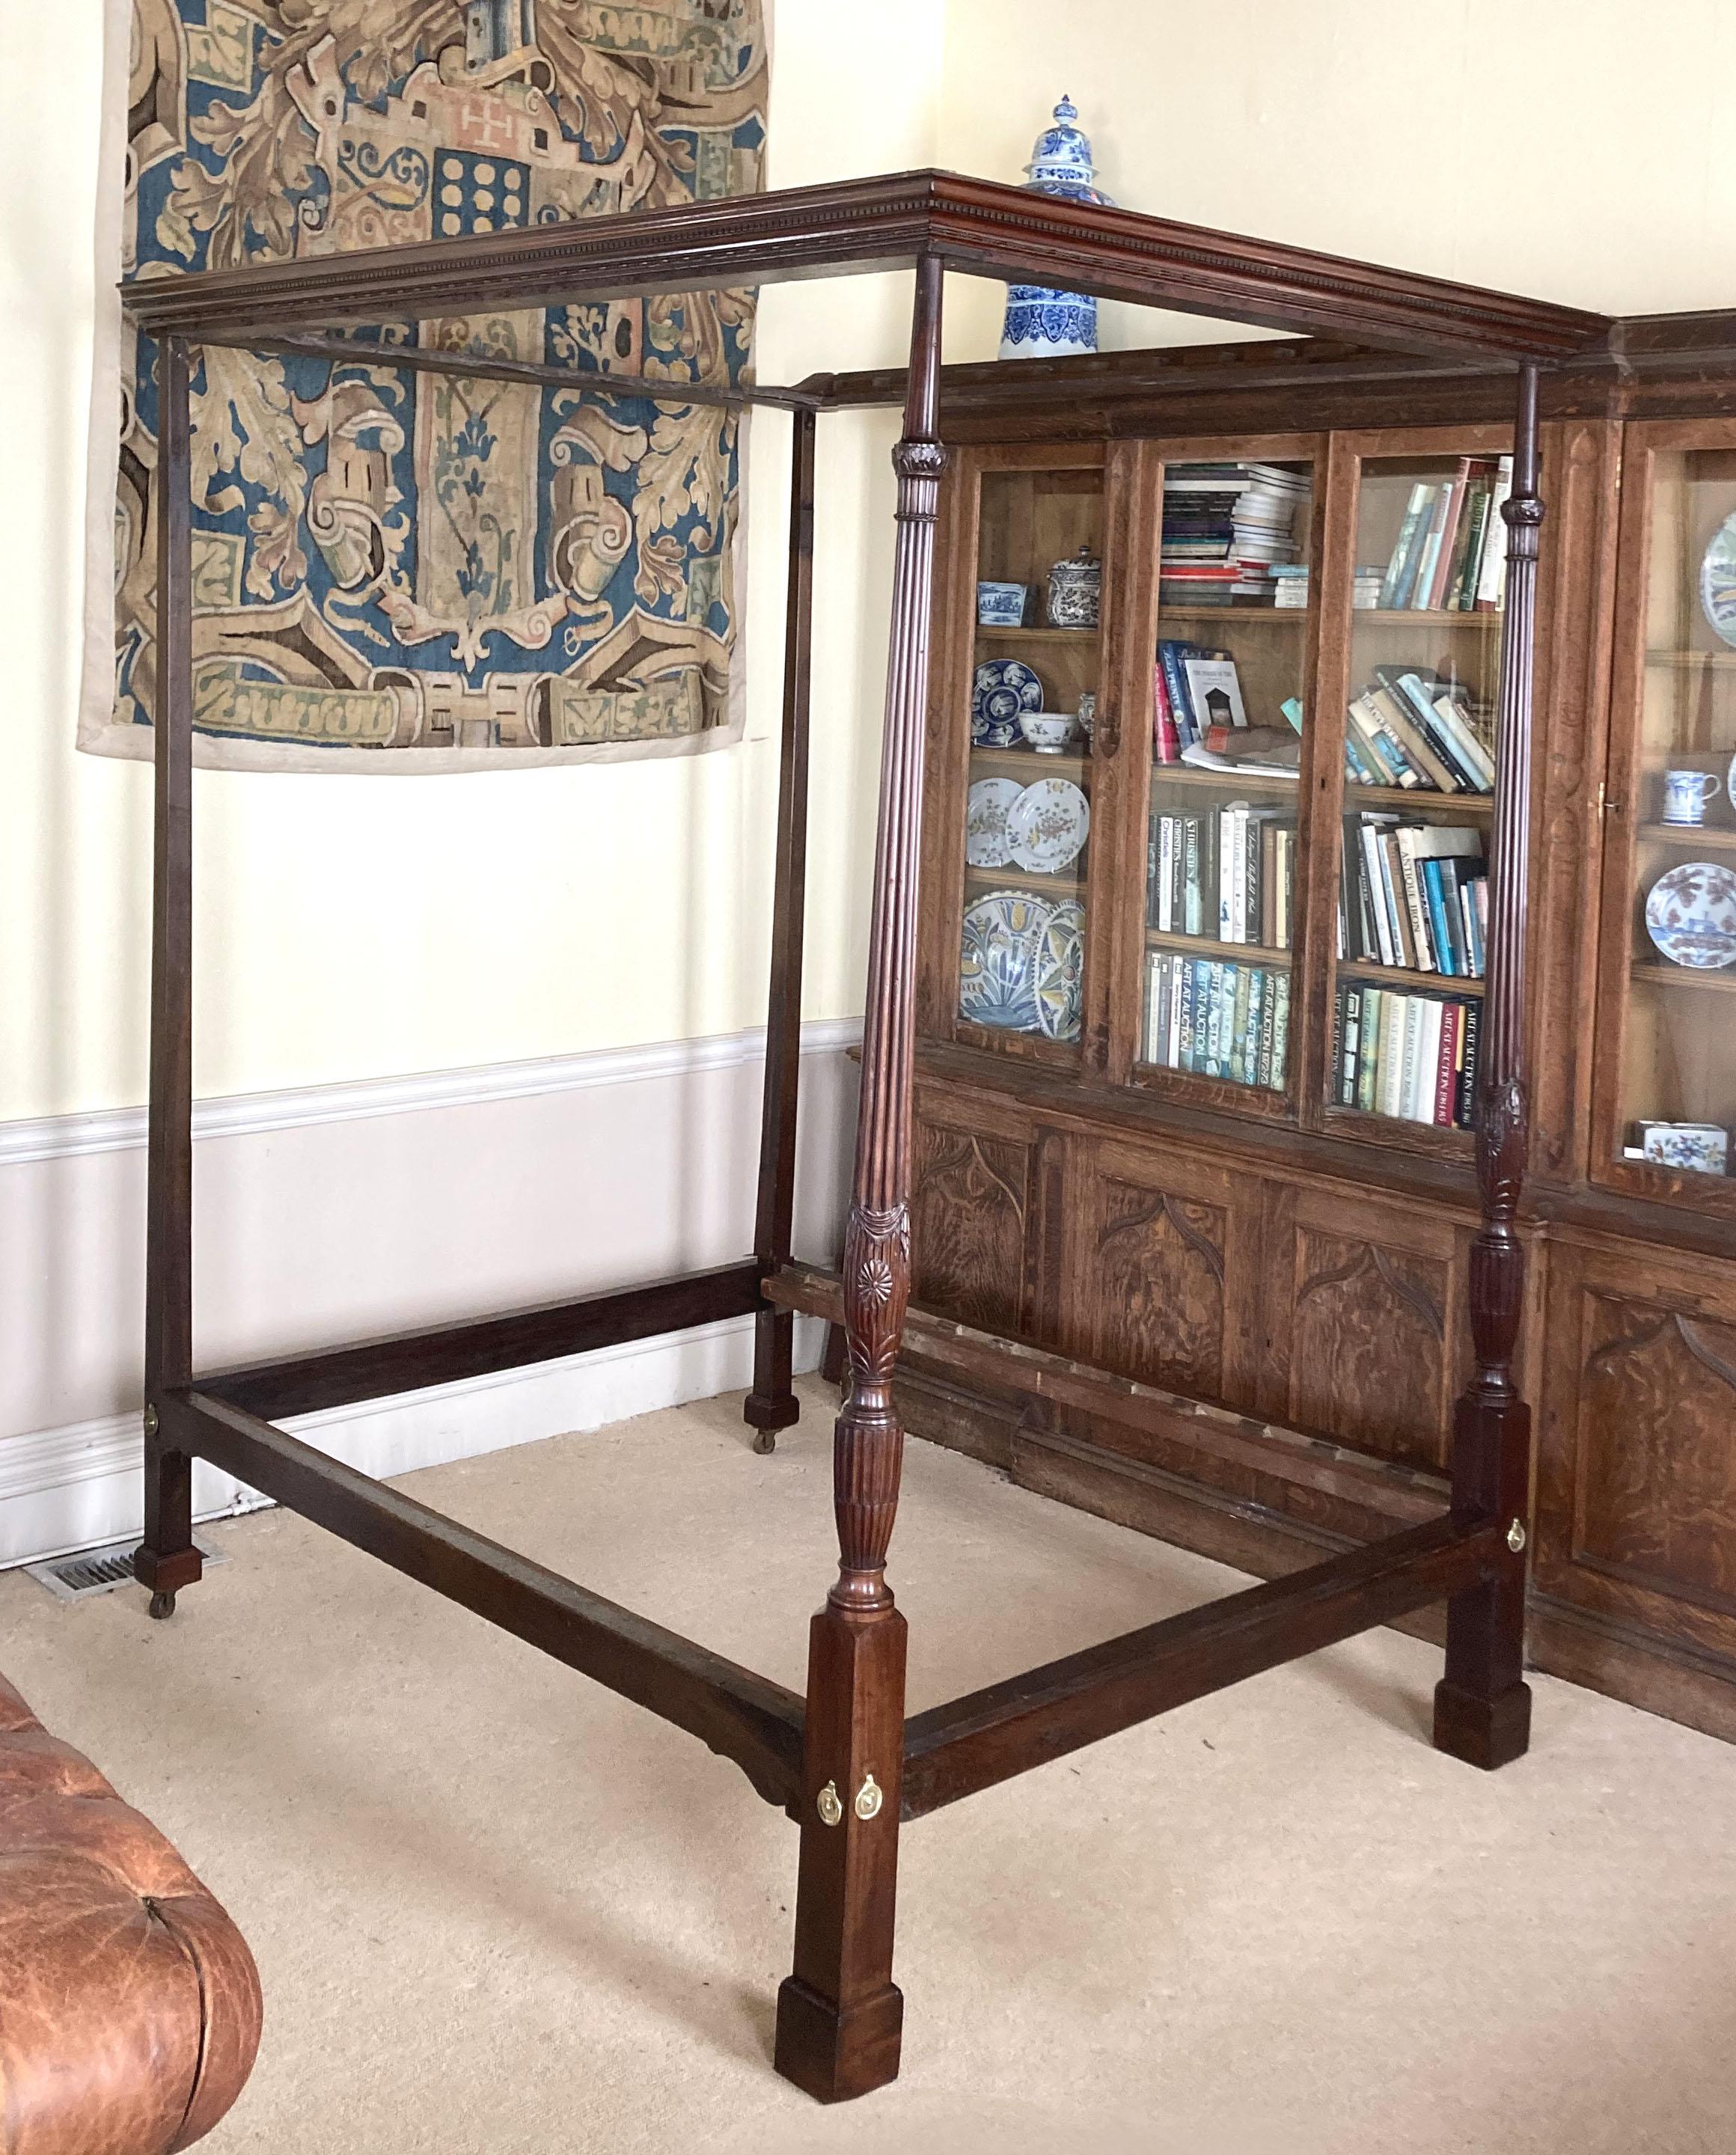 English George III mahogany four-poster bed